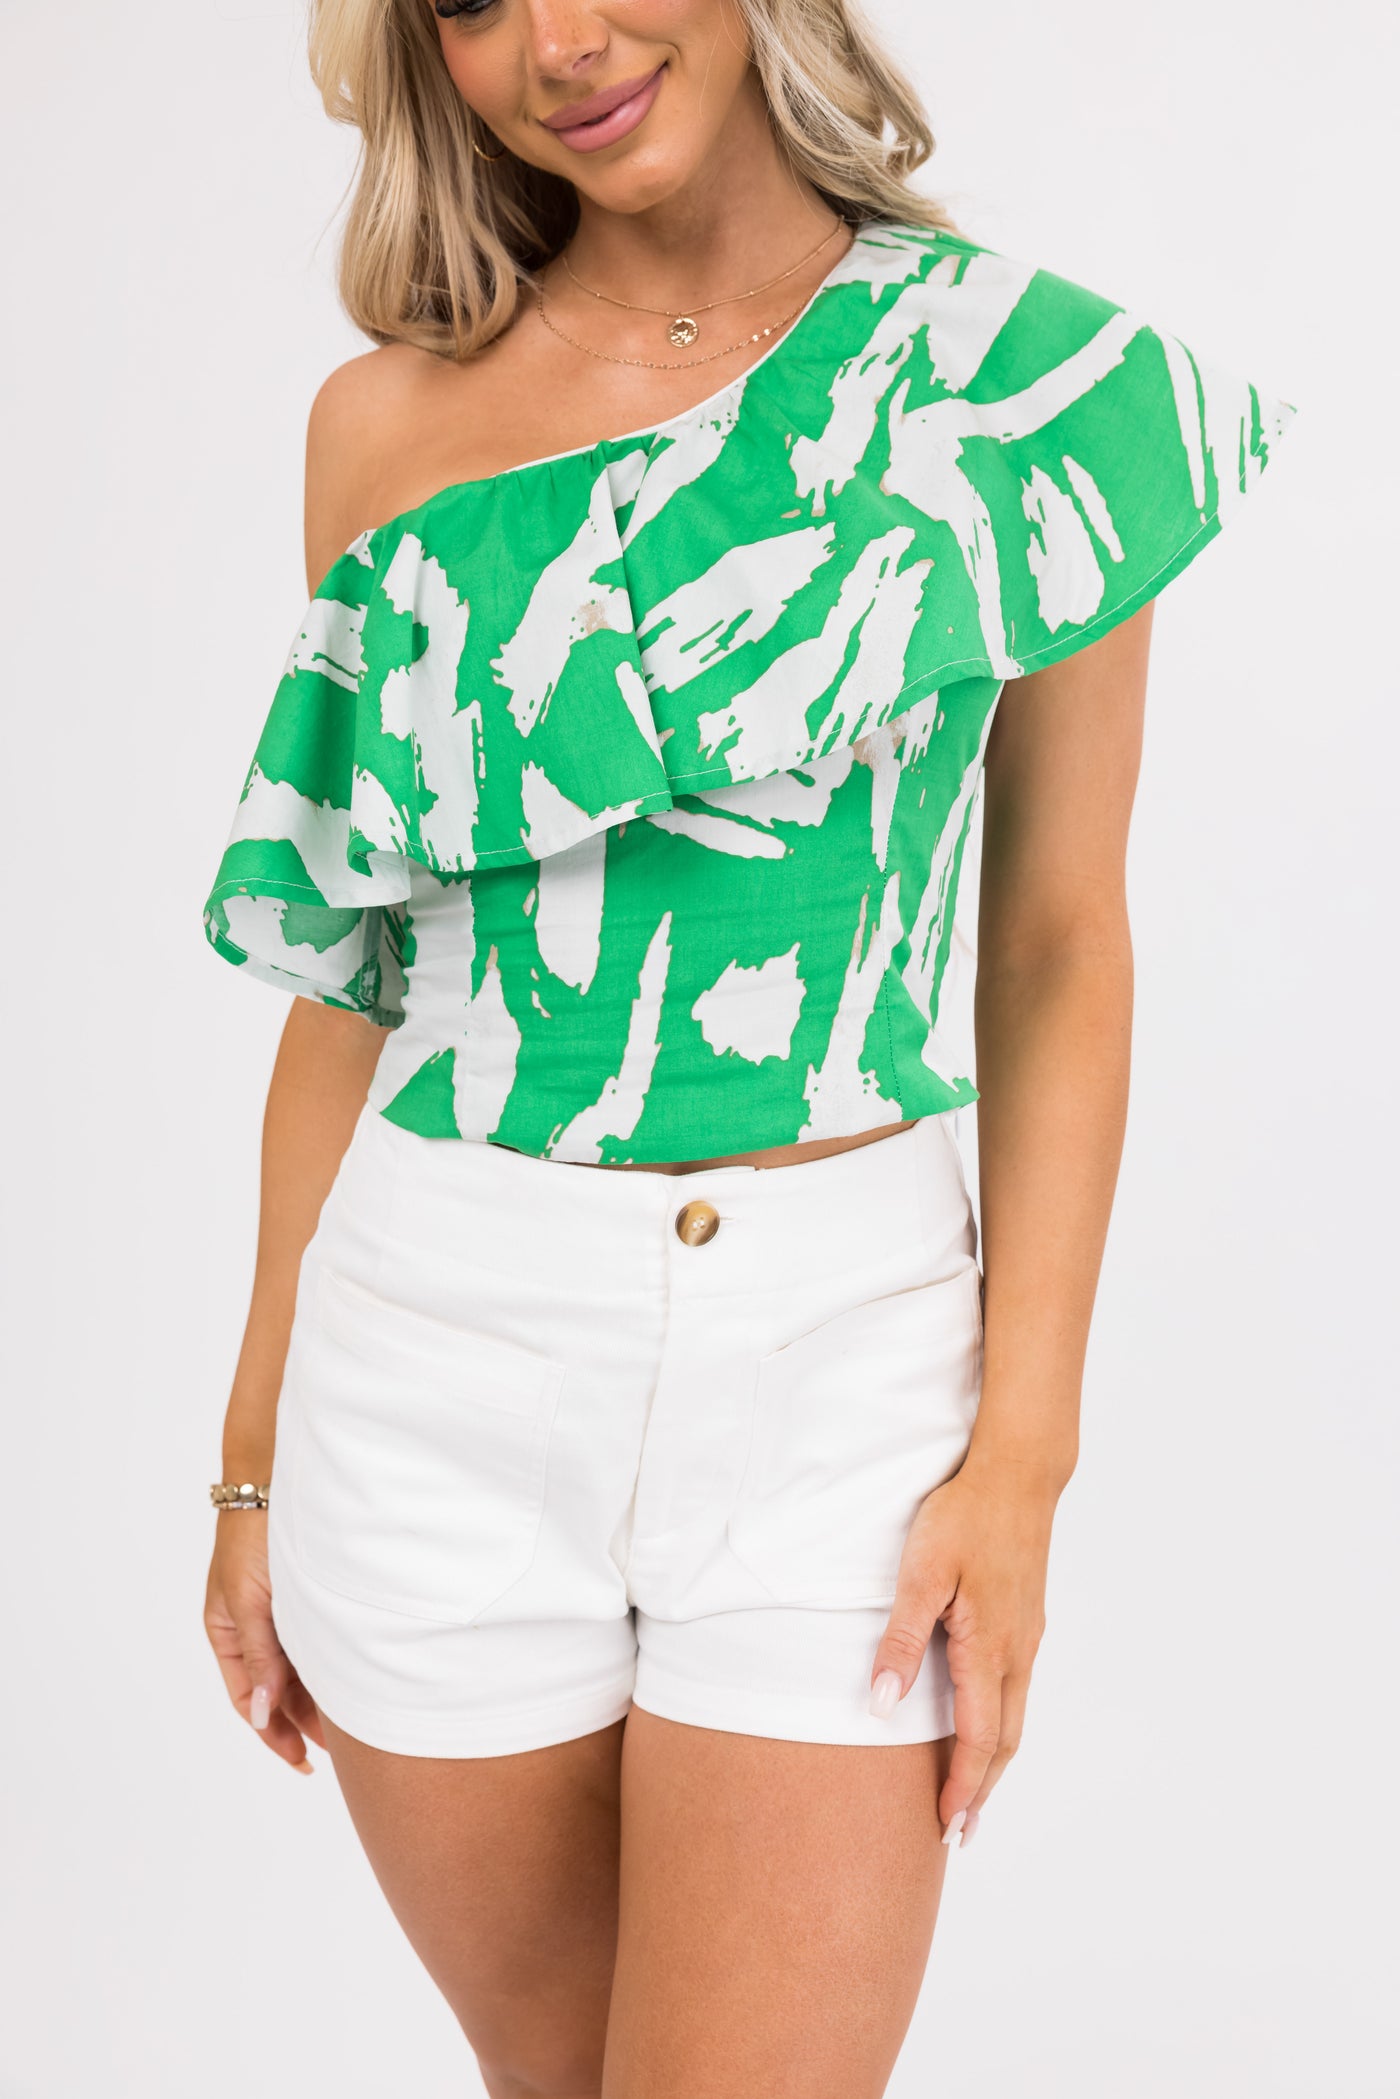 Flying Tomato Kelly Green Abstract Print Top